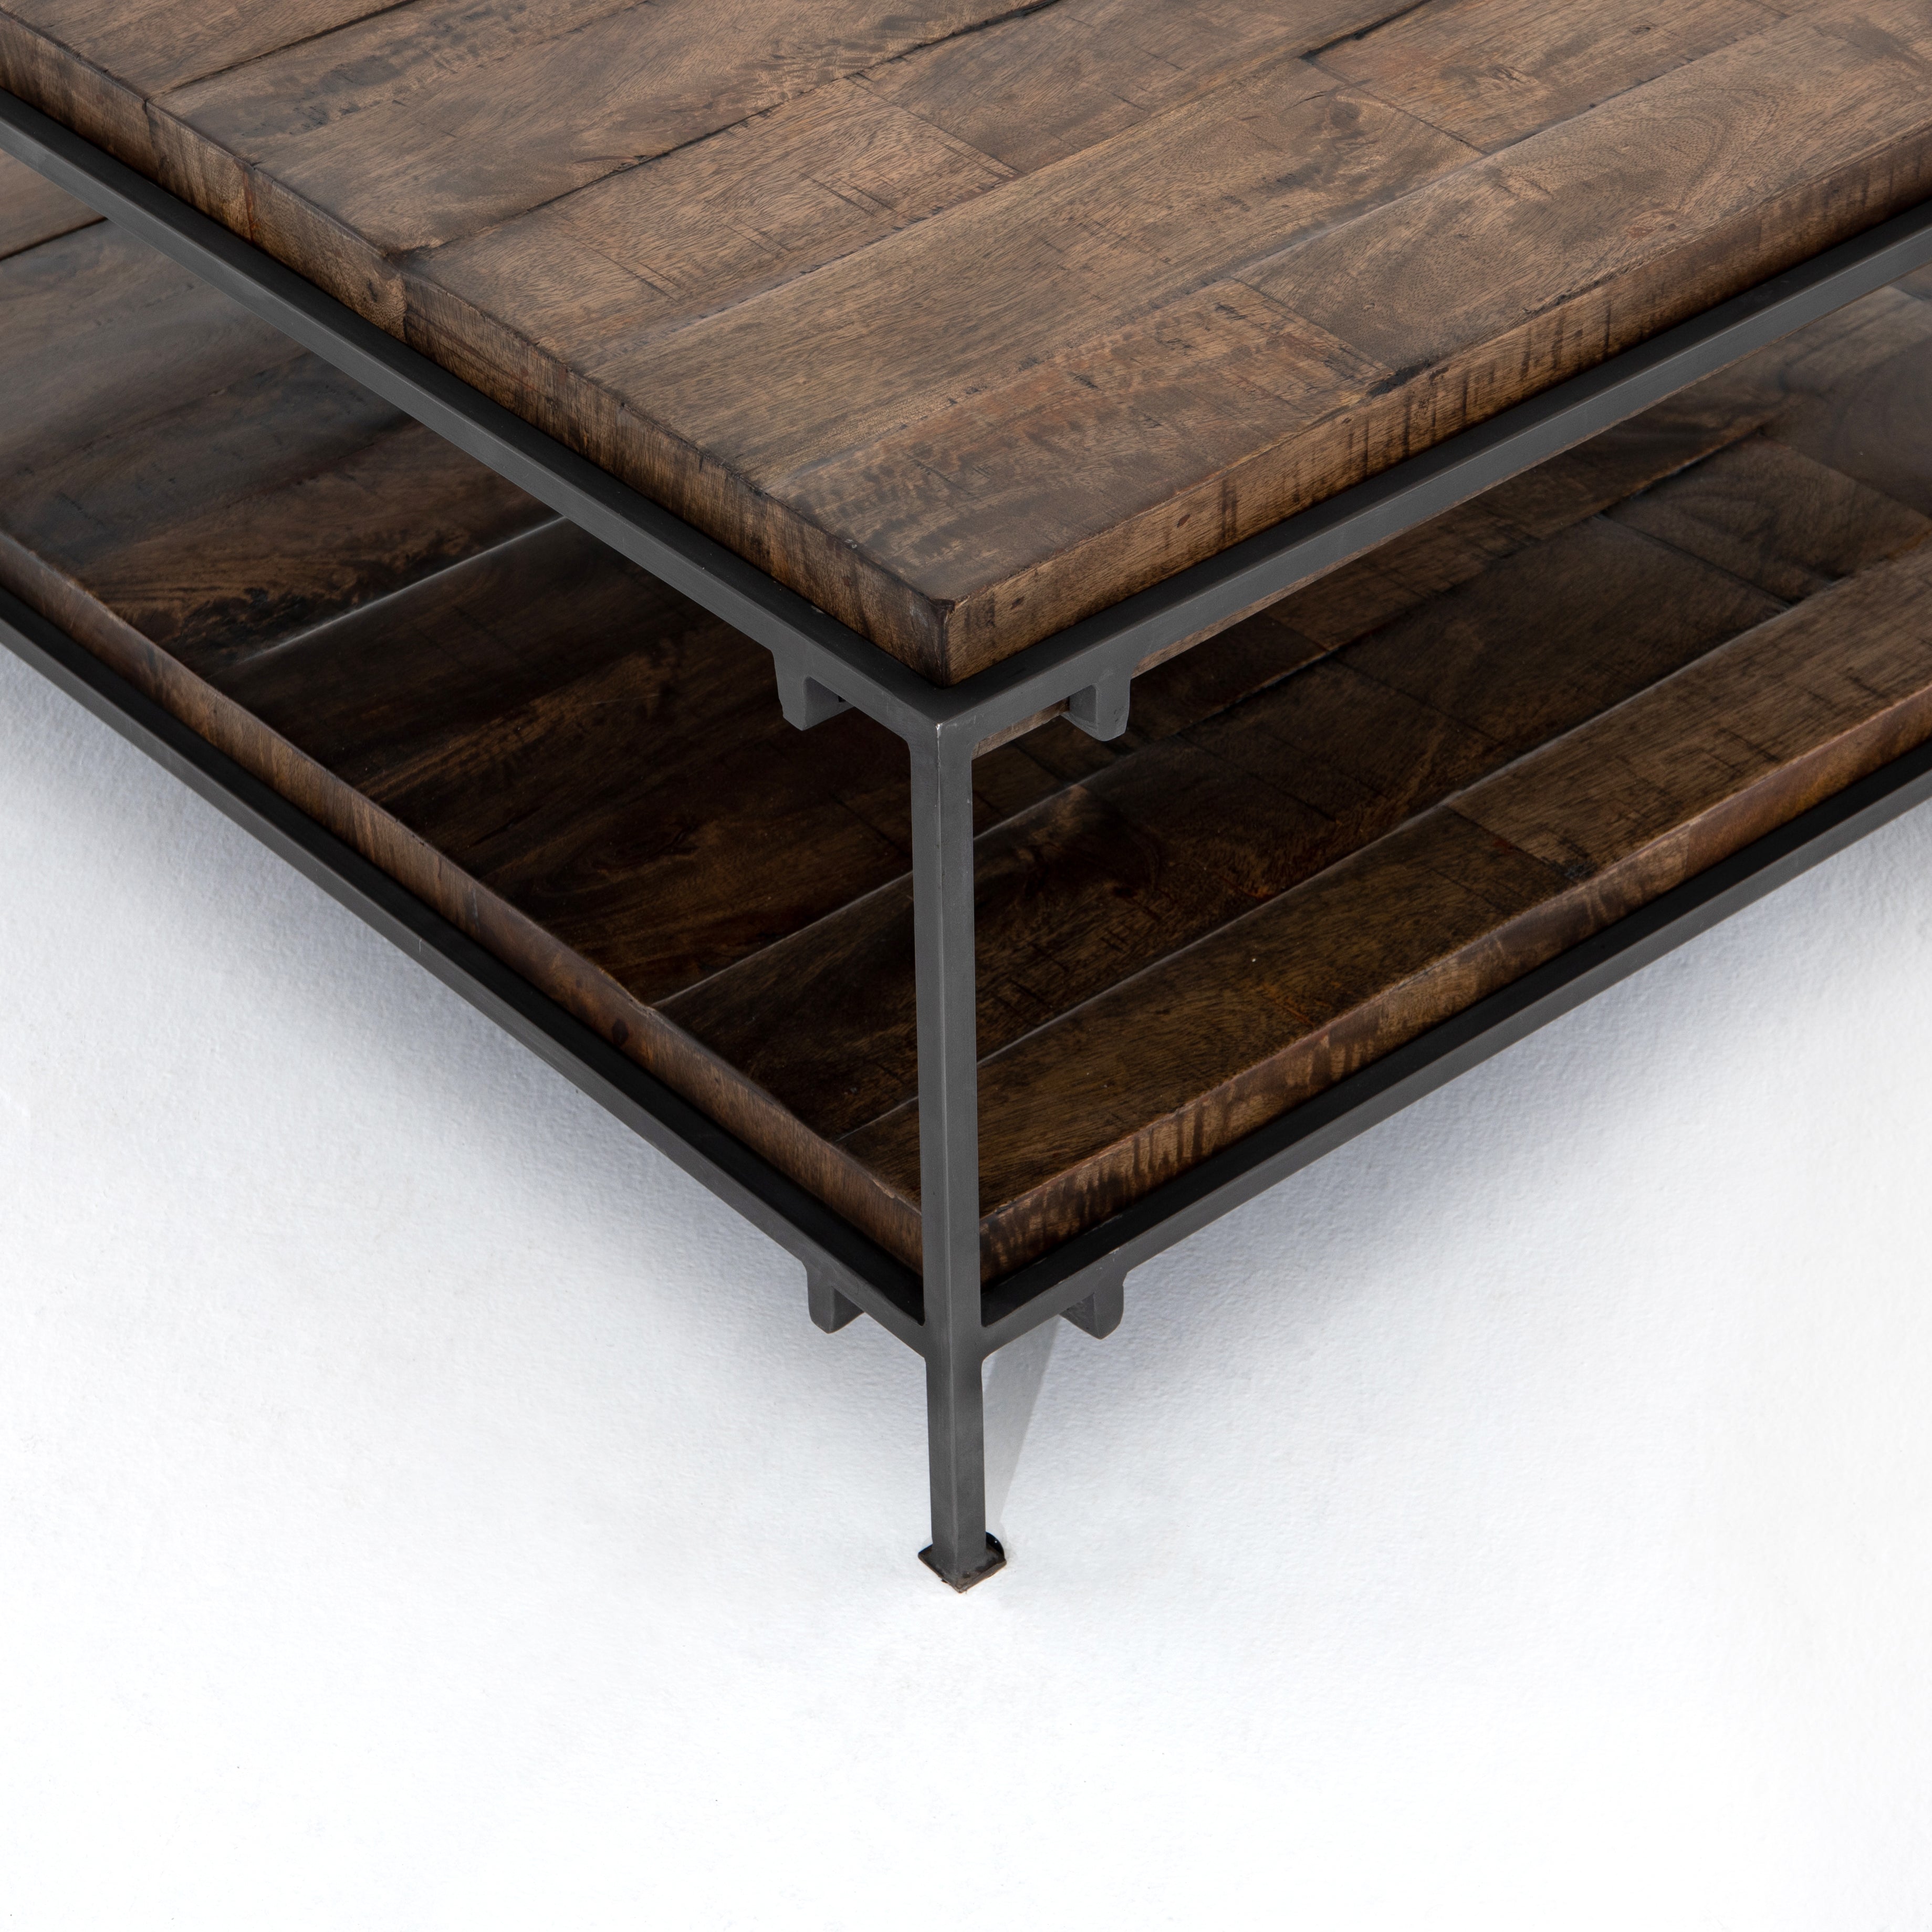 Weathered Hickory & Gunmetal Iron | Simien Square Coffee Table | Valley Ridge Furniture